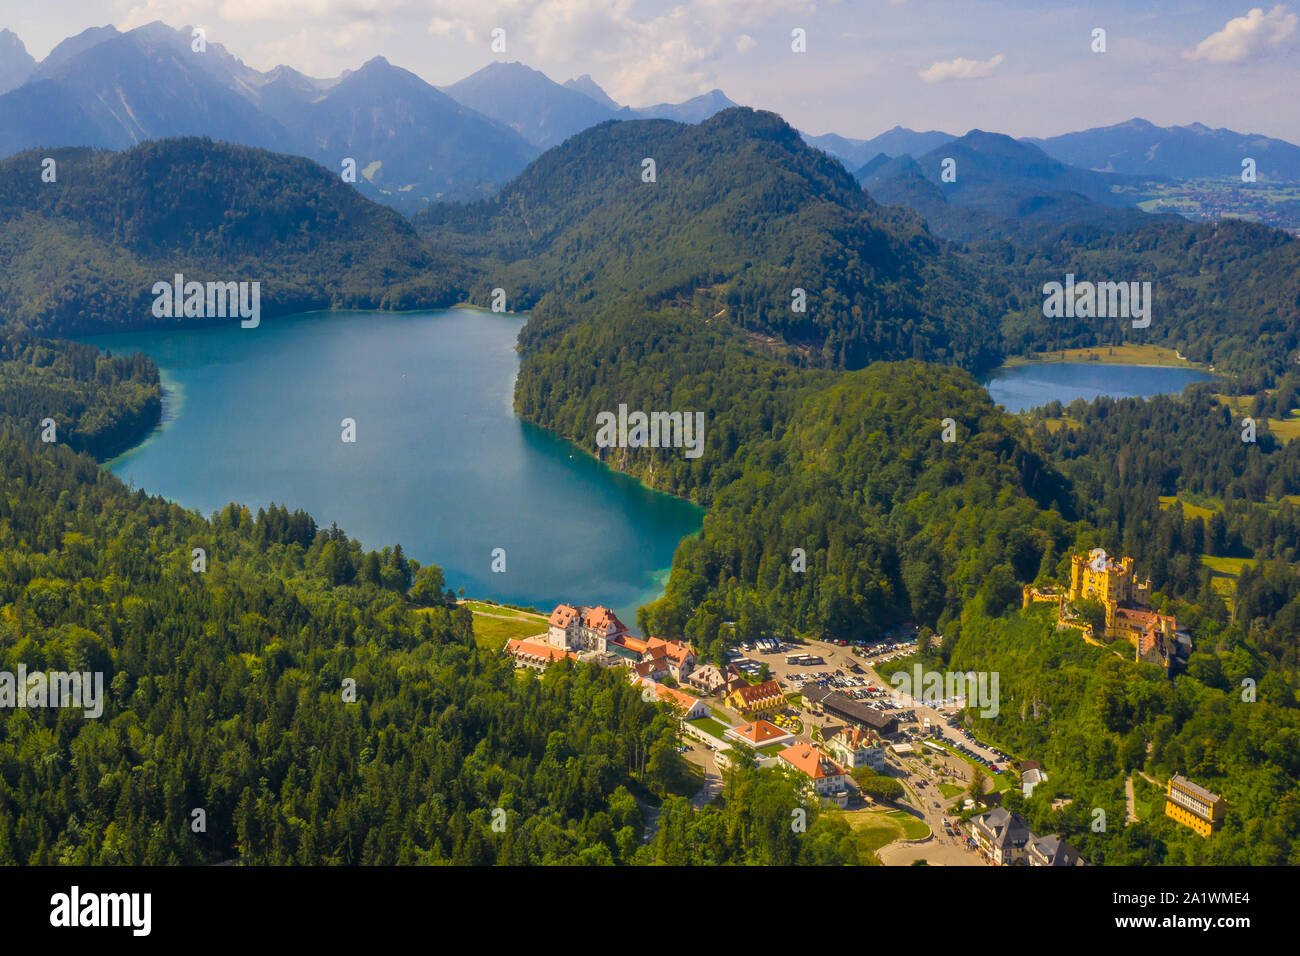 Aerial view on Alpsee lake and Hohenschwangau Castle, Bavaria, Germany. Concept of traveling and hiking in German Alps. Stock Photo